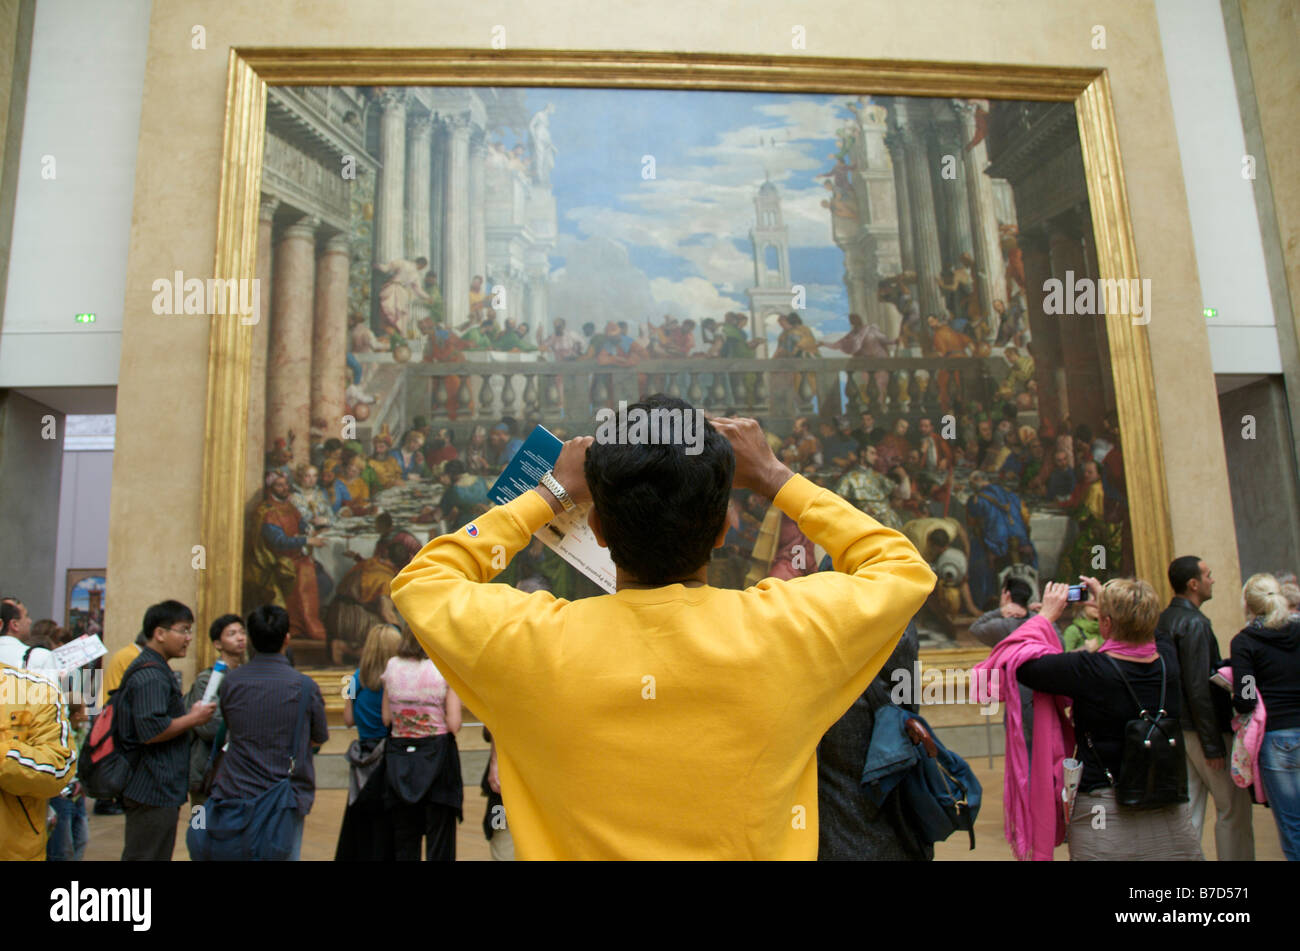 Louvre, Paris, interior - people inside taking photos of the paintings Stock Photo